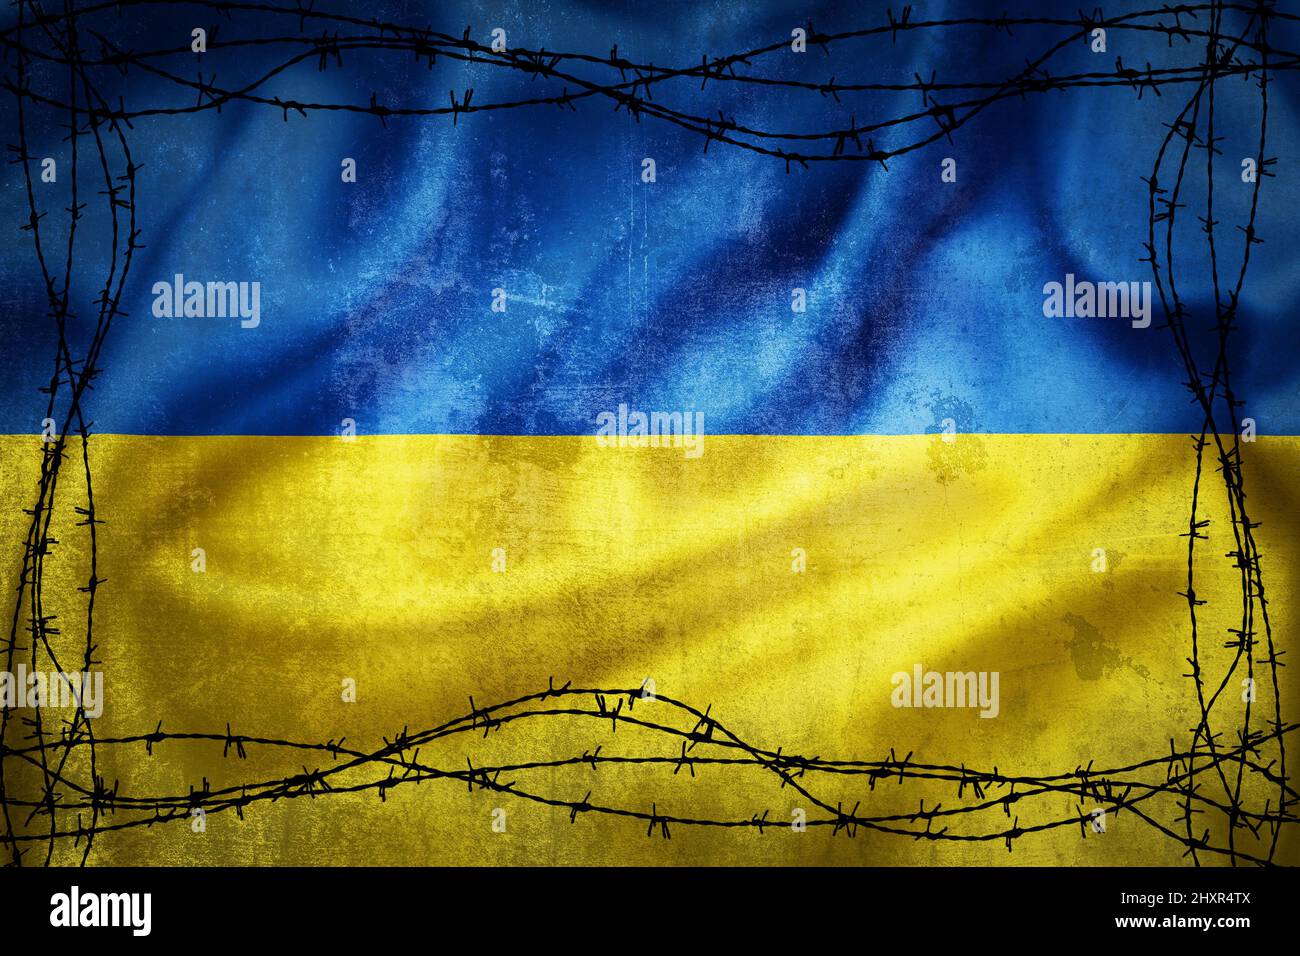 Grunge flag of Ukraine surrounded by barb wire illustration, concept of tense relations between Ukraine and Russia Stock Photo